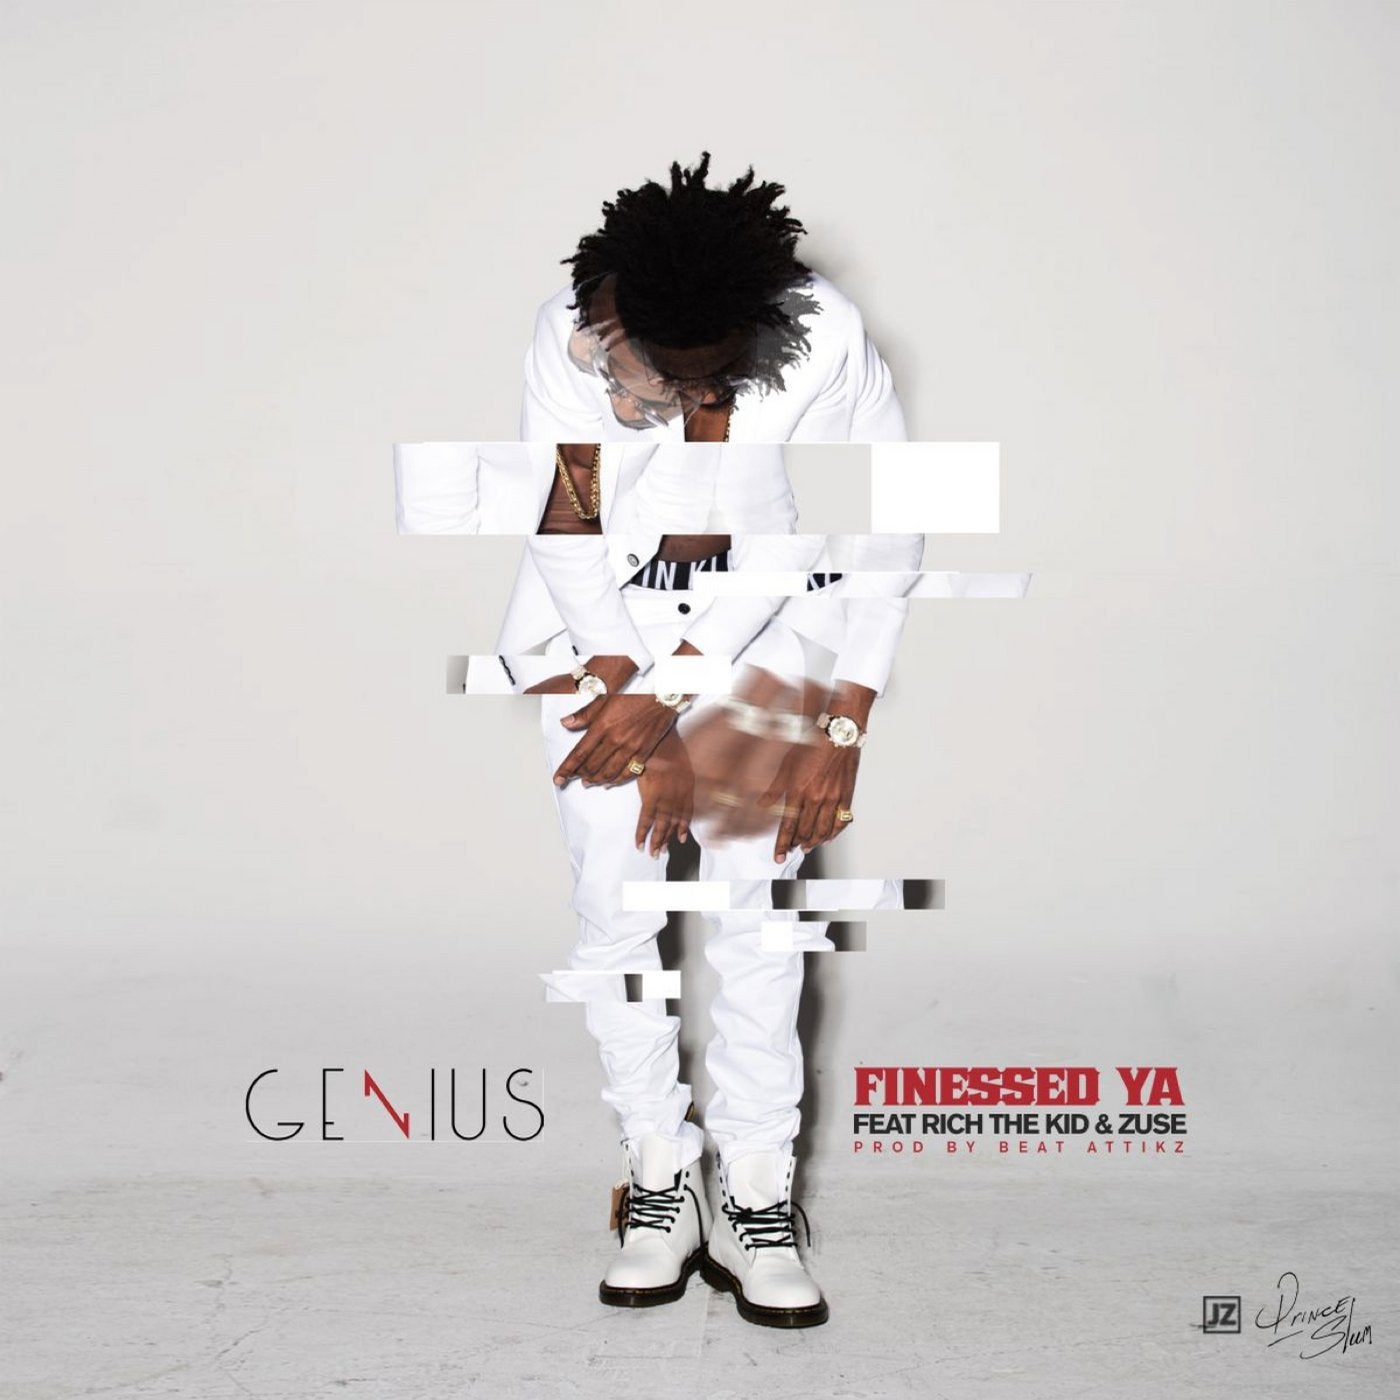 Finessed Ya (feat. Rich The Kid & Zuse)